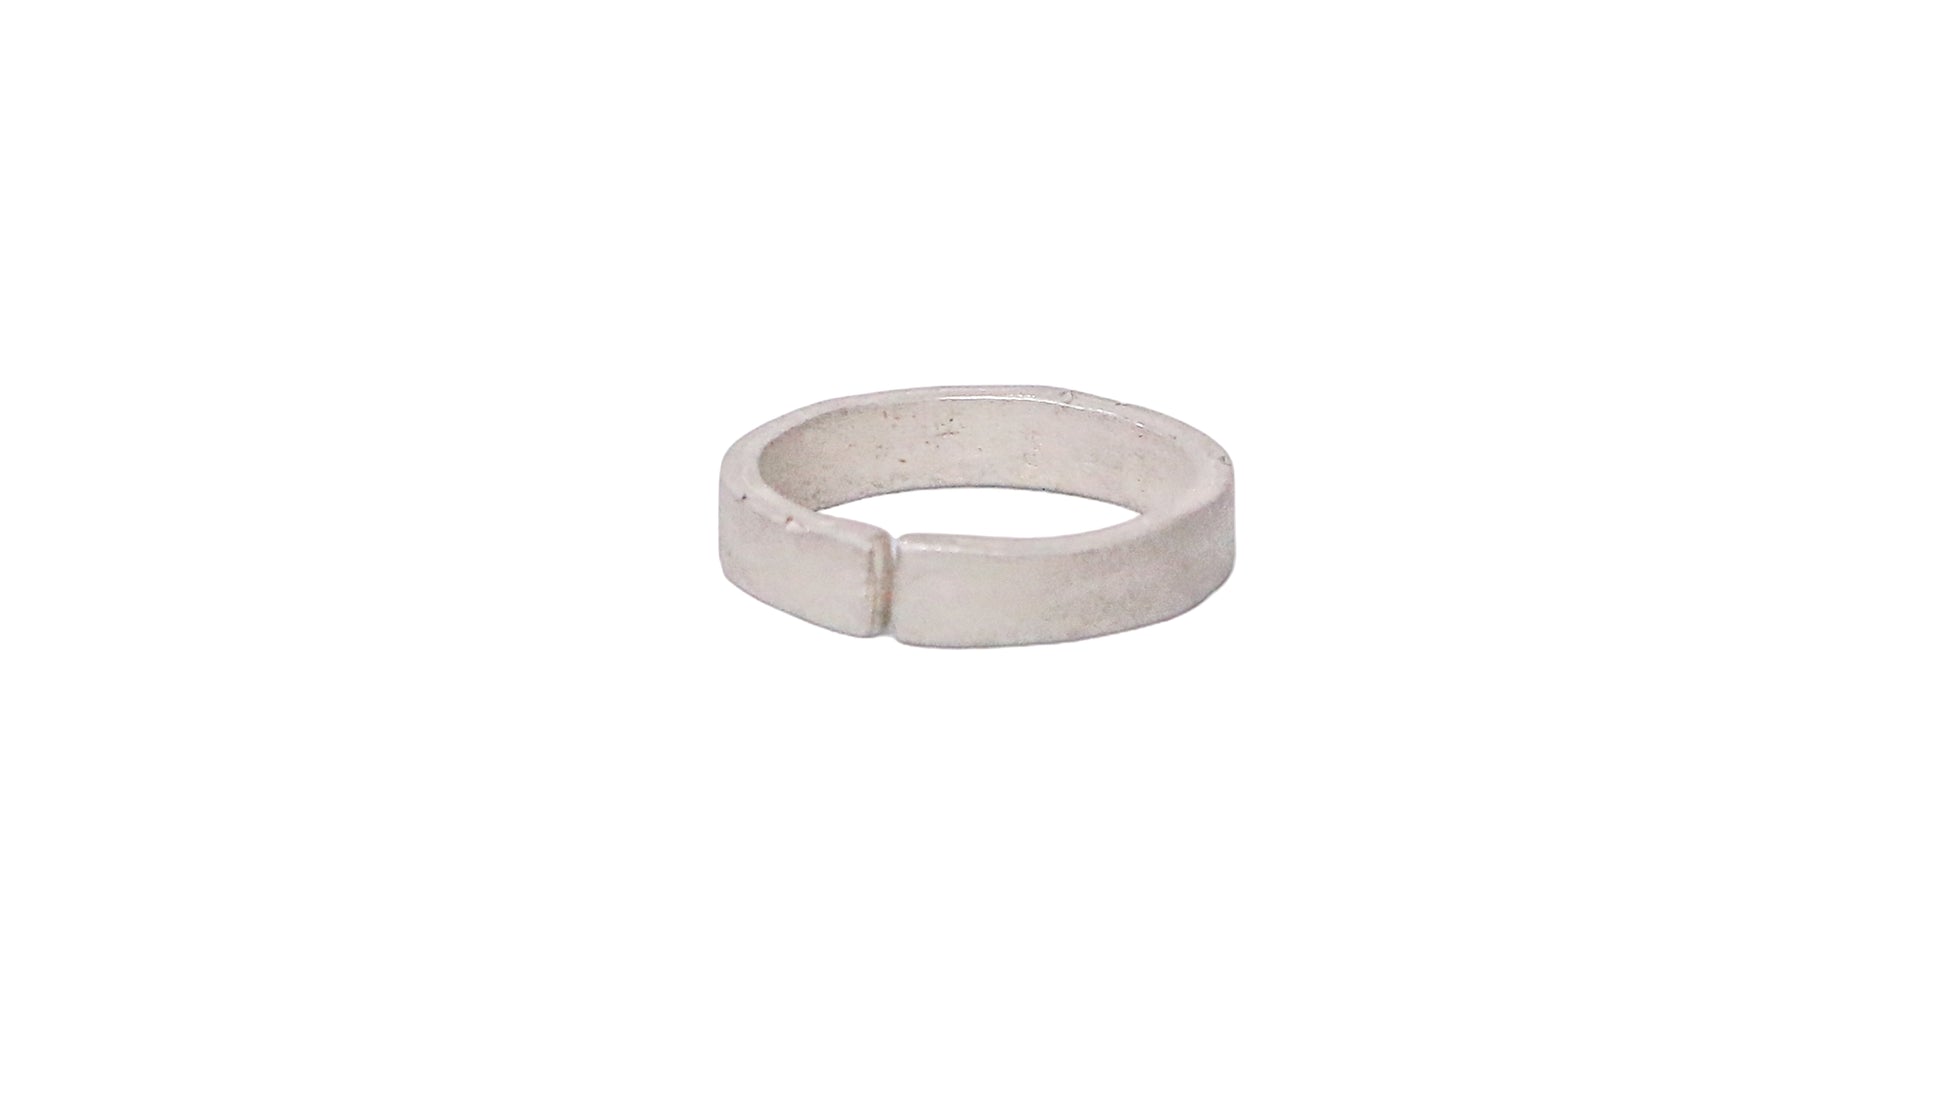 SECTION-WHS/0565 RINGS - JUOUL 